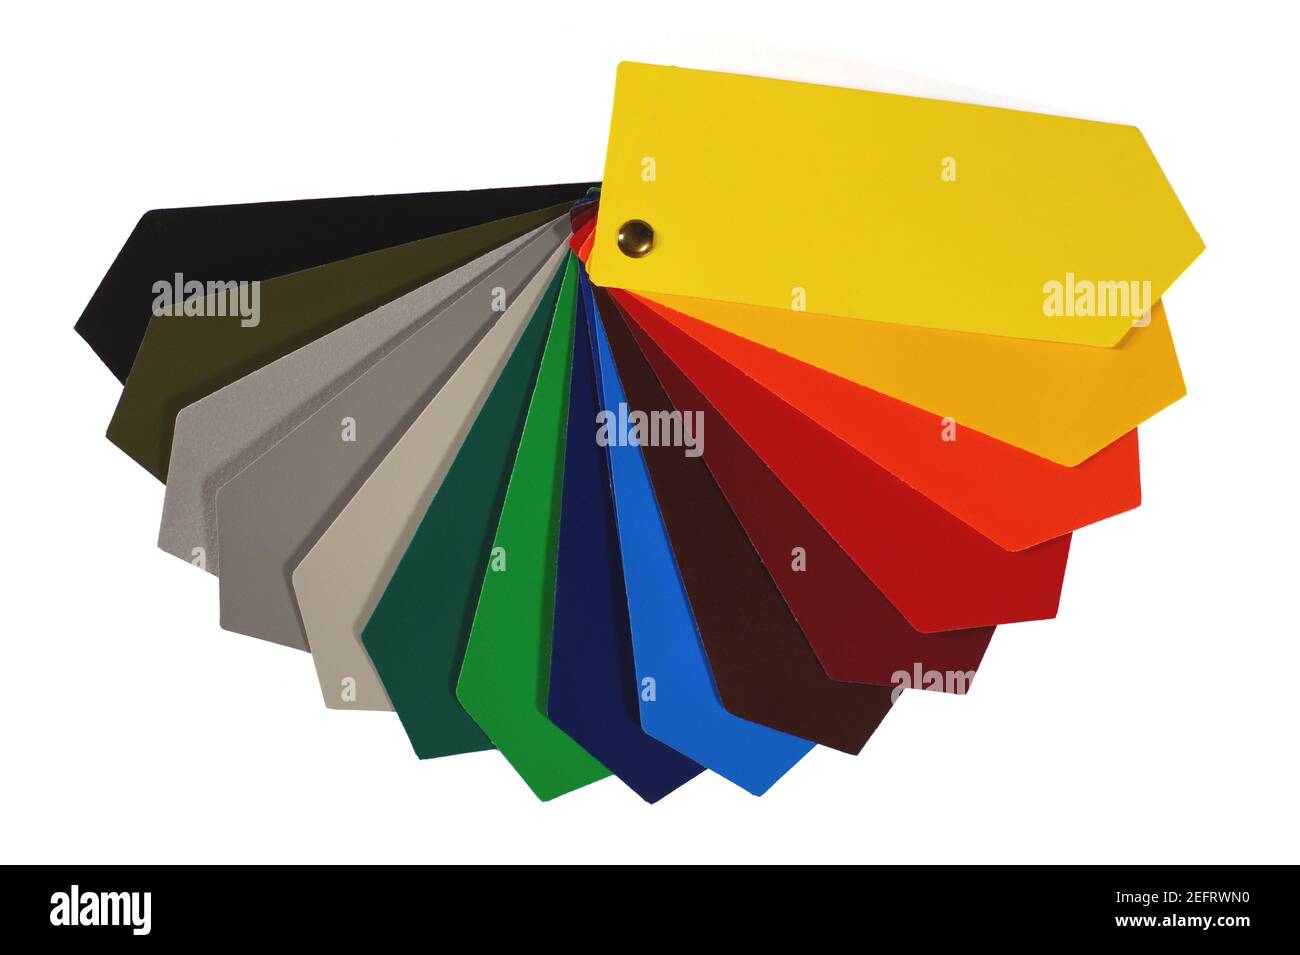 Advertisement. Color chart of one of the most popular advertising media: PVC coated banner. Stock Photo